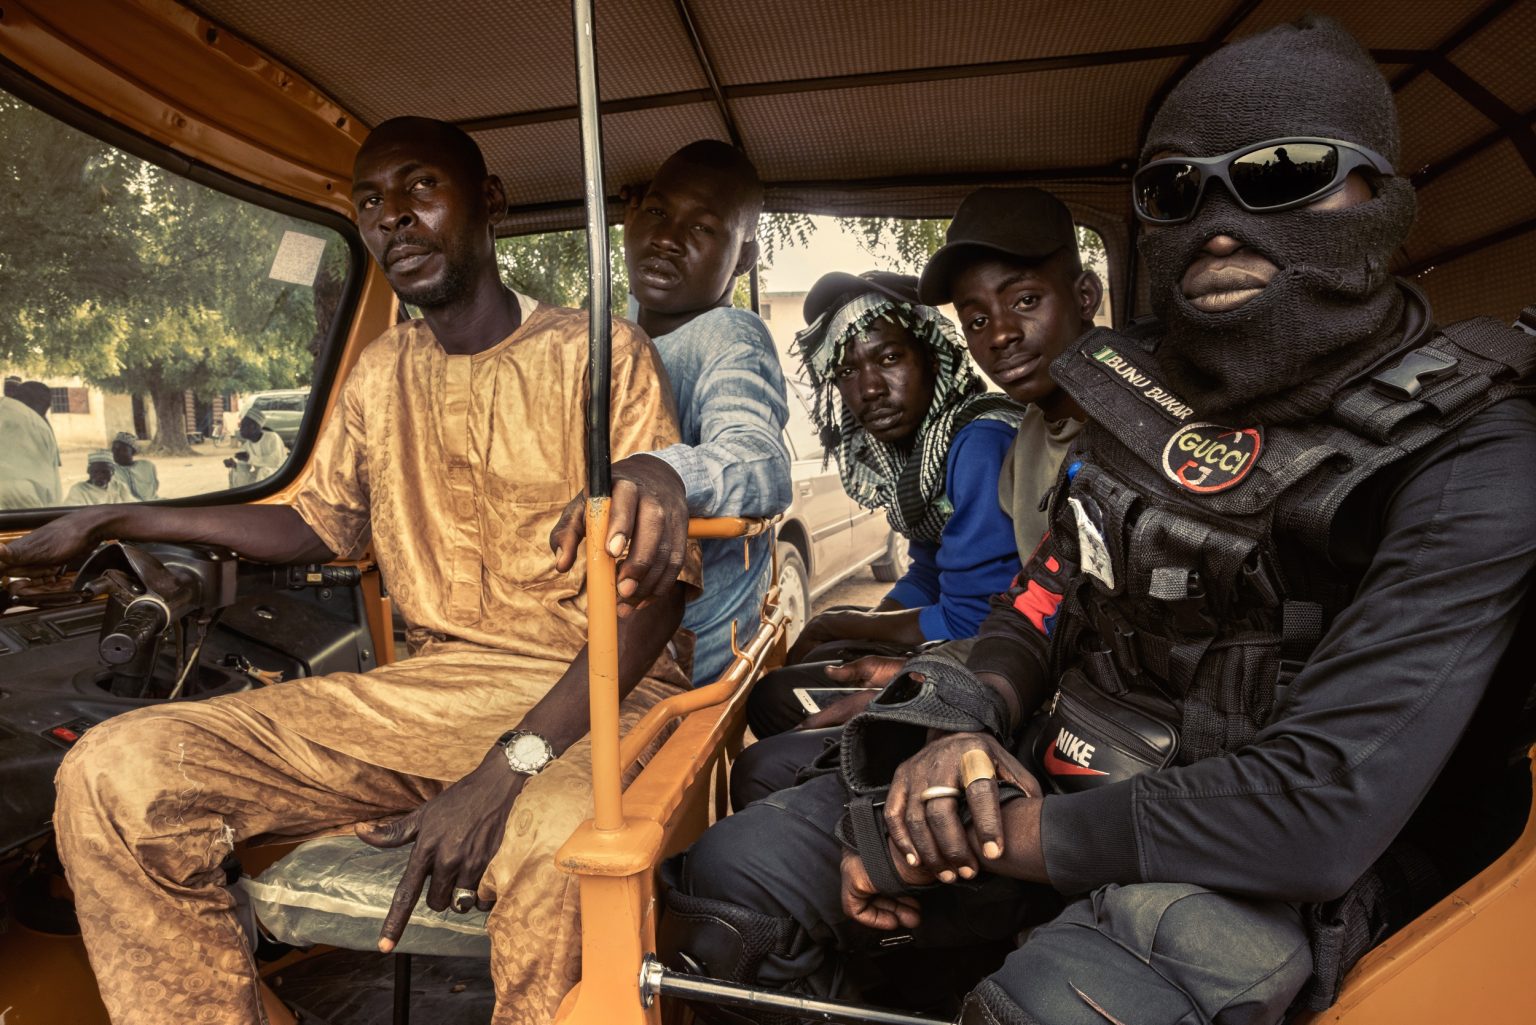 Maiduguri, Nigeria, Africa, May 2021 - A group of the Civilian Joint Task Force (CJTF) pose for a picture in a rickshaw.  The Civilian Joint Task Force (CJTF) is a group of militants that was formed in Maiduguri, Borno State, Nigeria to help oust Boko Haram Islamist fighters from their city. The vigilante group numbers over 26,000 in the northeastern Borno and Yobe States. In June 2013, the civilian JTF emerged and volunteered to assist the Special and Joint Task Force with the counter-terrorism campaign. The civilian JTF is made up of young and old civilians armed with mundane weapons such as bows and arrows, swords, clubs and daggers that operate under the supervision of civilian JTF sector commanders. The civilian JTF began as a community effort and later as a joint effort with the security forces to help fight Boko Haram. Maiduguri city has gone back to normalcy with the aid of the civilian JTF.  ><
Maiduguri, Nigeria, Africa, maggio 2021 -  Un gruppo del Civilian Joint Task Force' (CJTF) -posano per una foto in un rickshaw. Il CJTF è un gruppo di militanti che si è formato a Maiduguri, nello stato di Borno, in Nigeria, per aiutare a cacciare i combattenti islamisti di Boko Haram dalla città. Il gruppo di vigilanti conta oltre 26.000 membri negli Stati nord-orientali di Borno e Yobe. La JTF è nata nel giugno 2013 su base volontaria di civili che si sono offerti di affiancare la task force speciale e congiunta nella campagna antiterrorismo. La JTF è composta da civili giovani e anziani armati di armi come archi e frecce, spade, mazze e pugnali. La città di Maiduguri è tornata ad una pseudo normalità grazie al loro impegno.